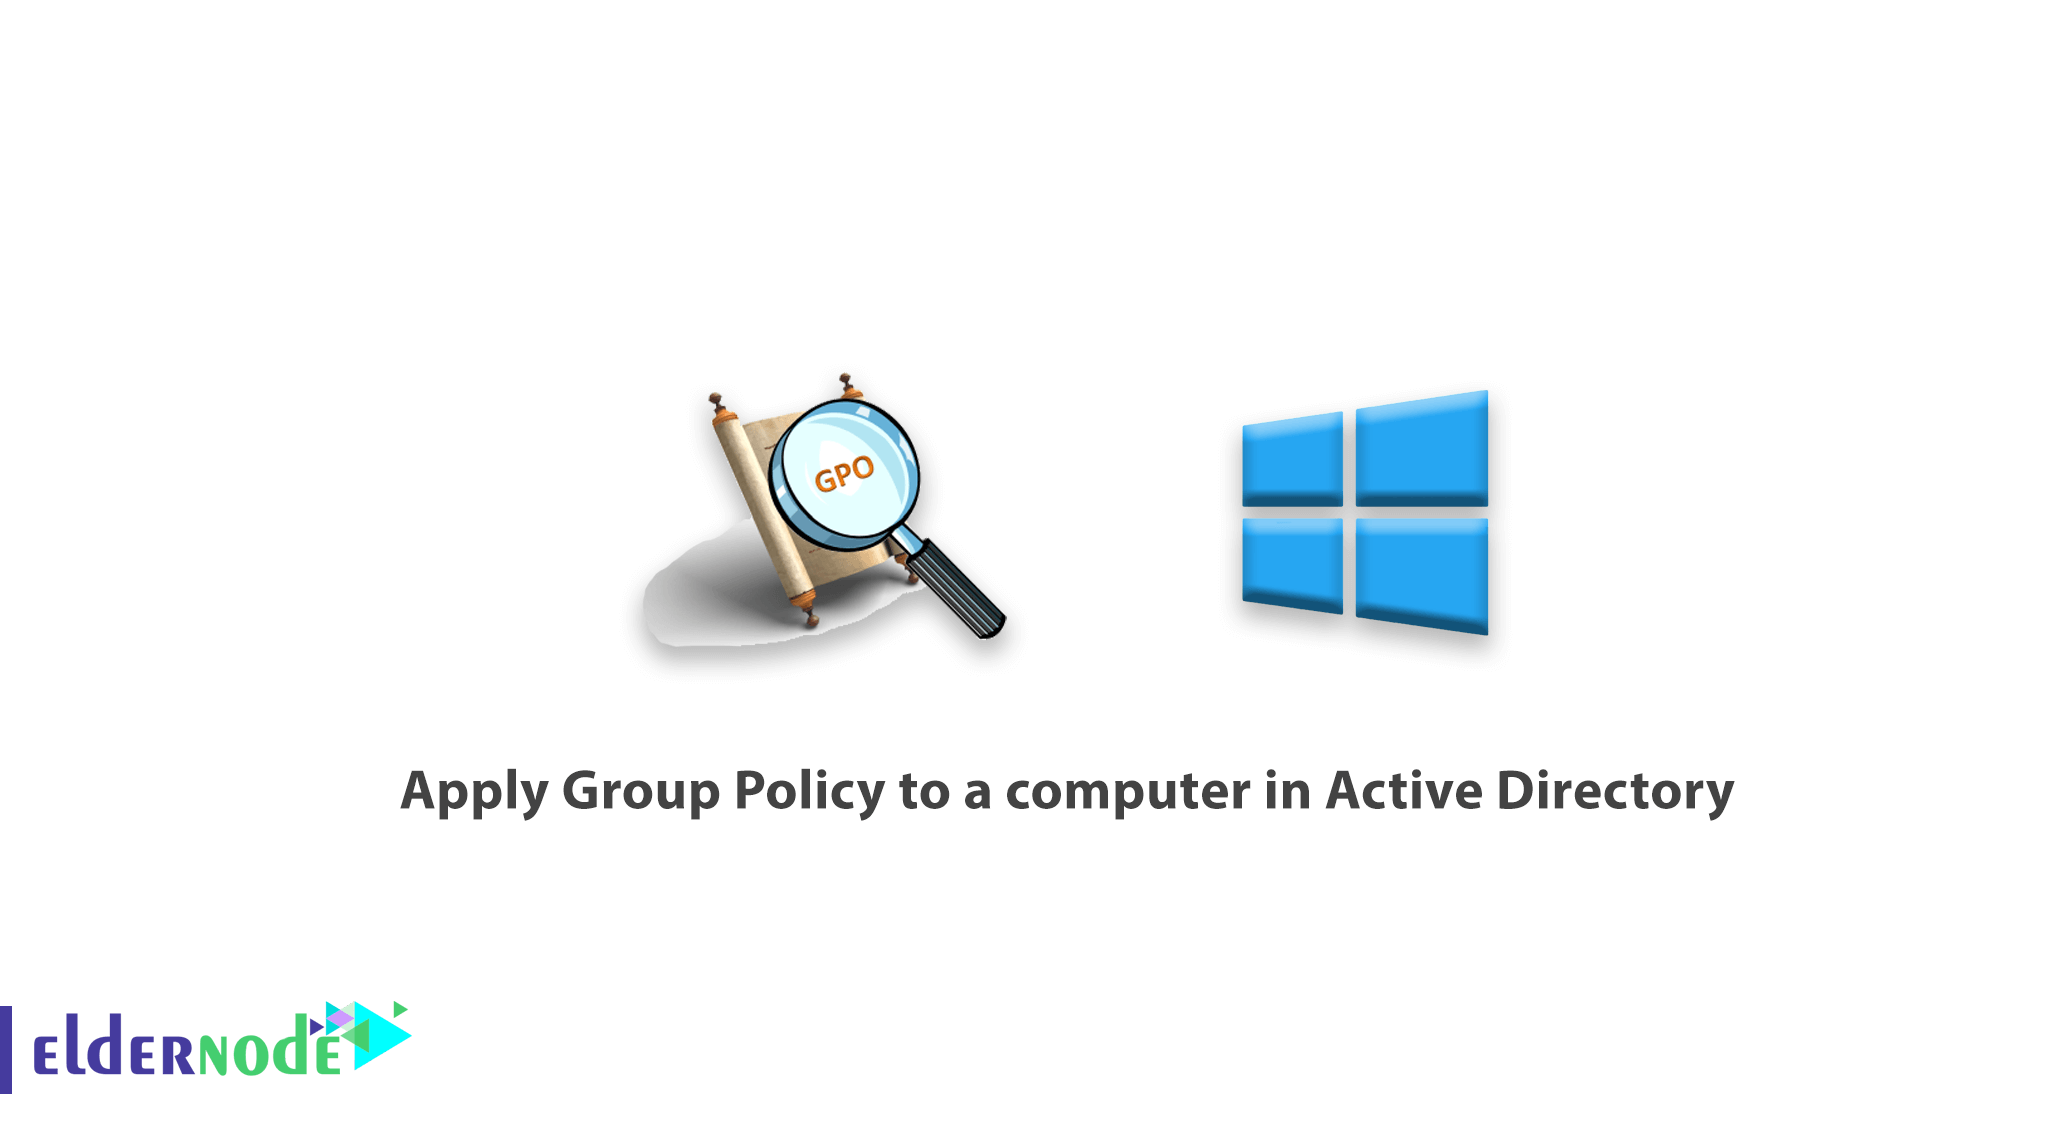 Learn how to apply Group Policy to a computer in Active Directory